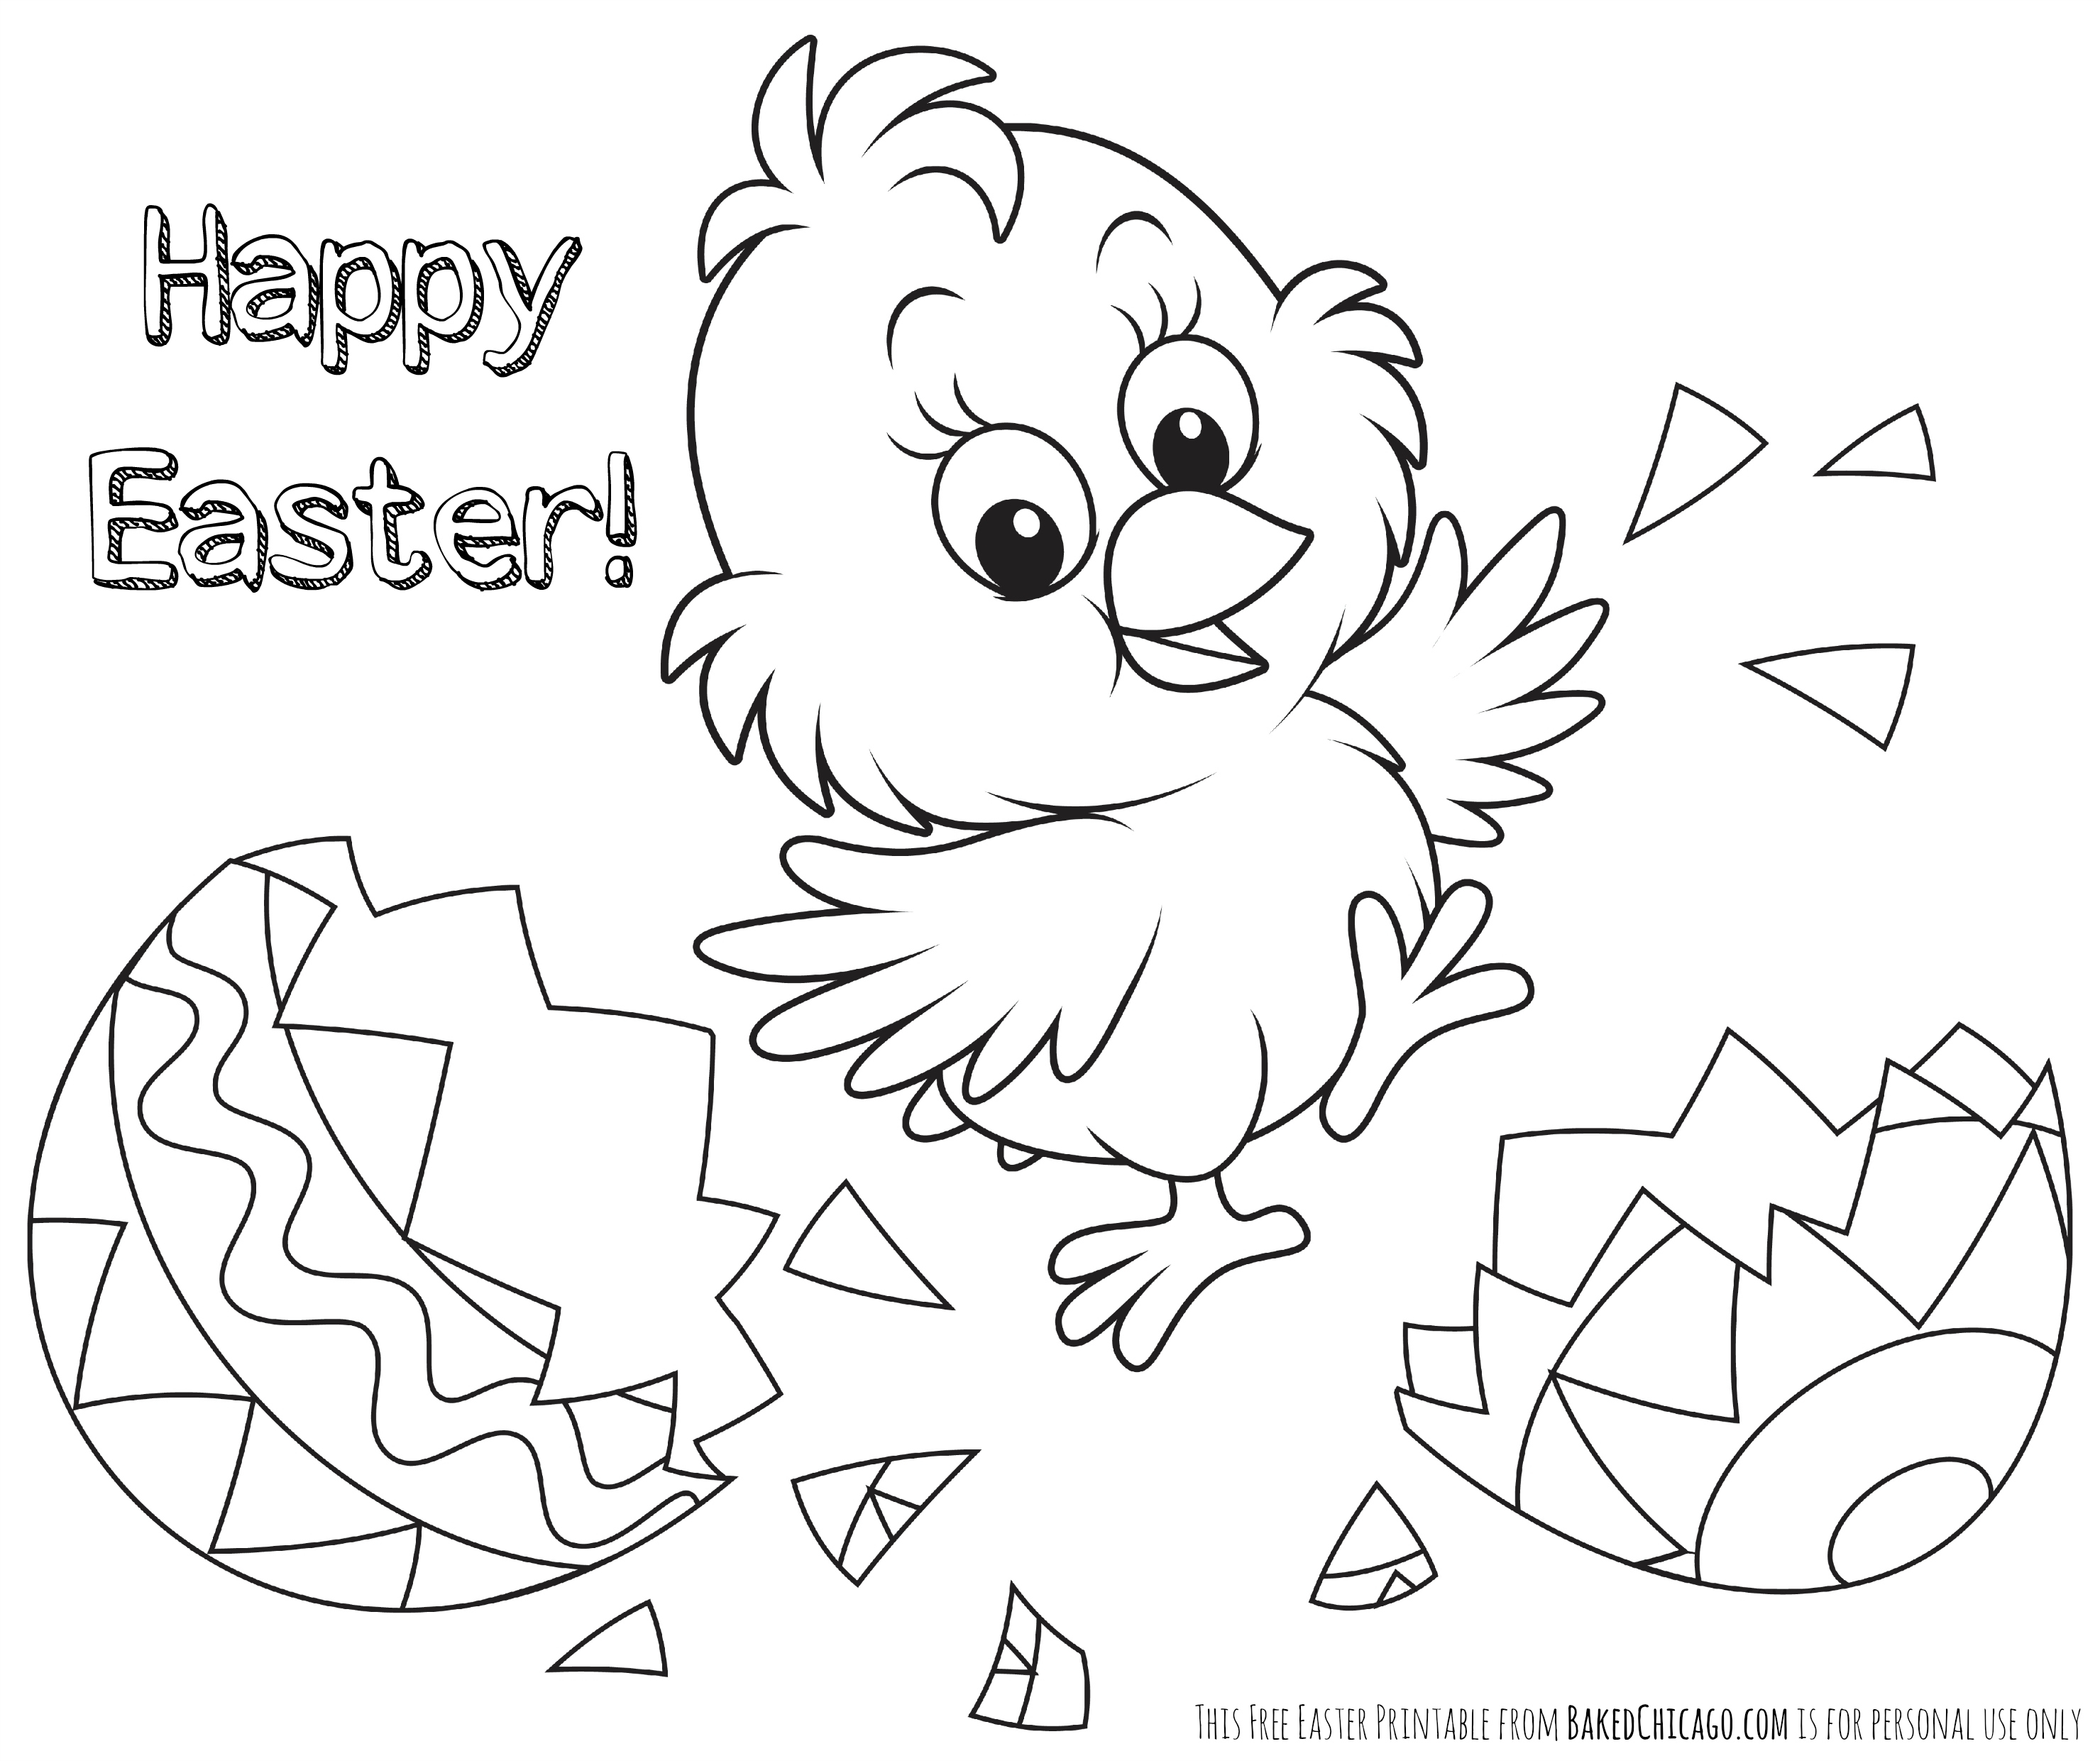 Coloring Pages : Easter Coloring Pages Printable Free Sheets Best Of - Free Printable Easter Drawings